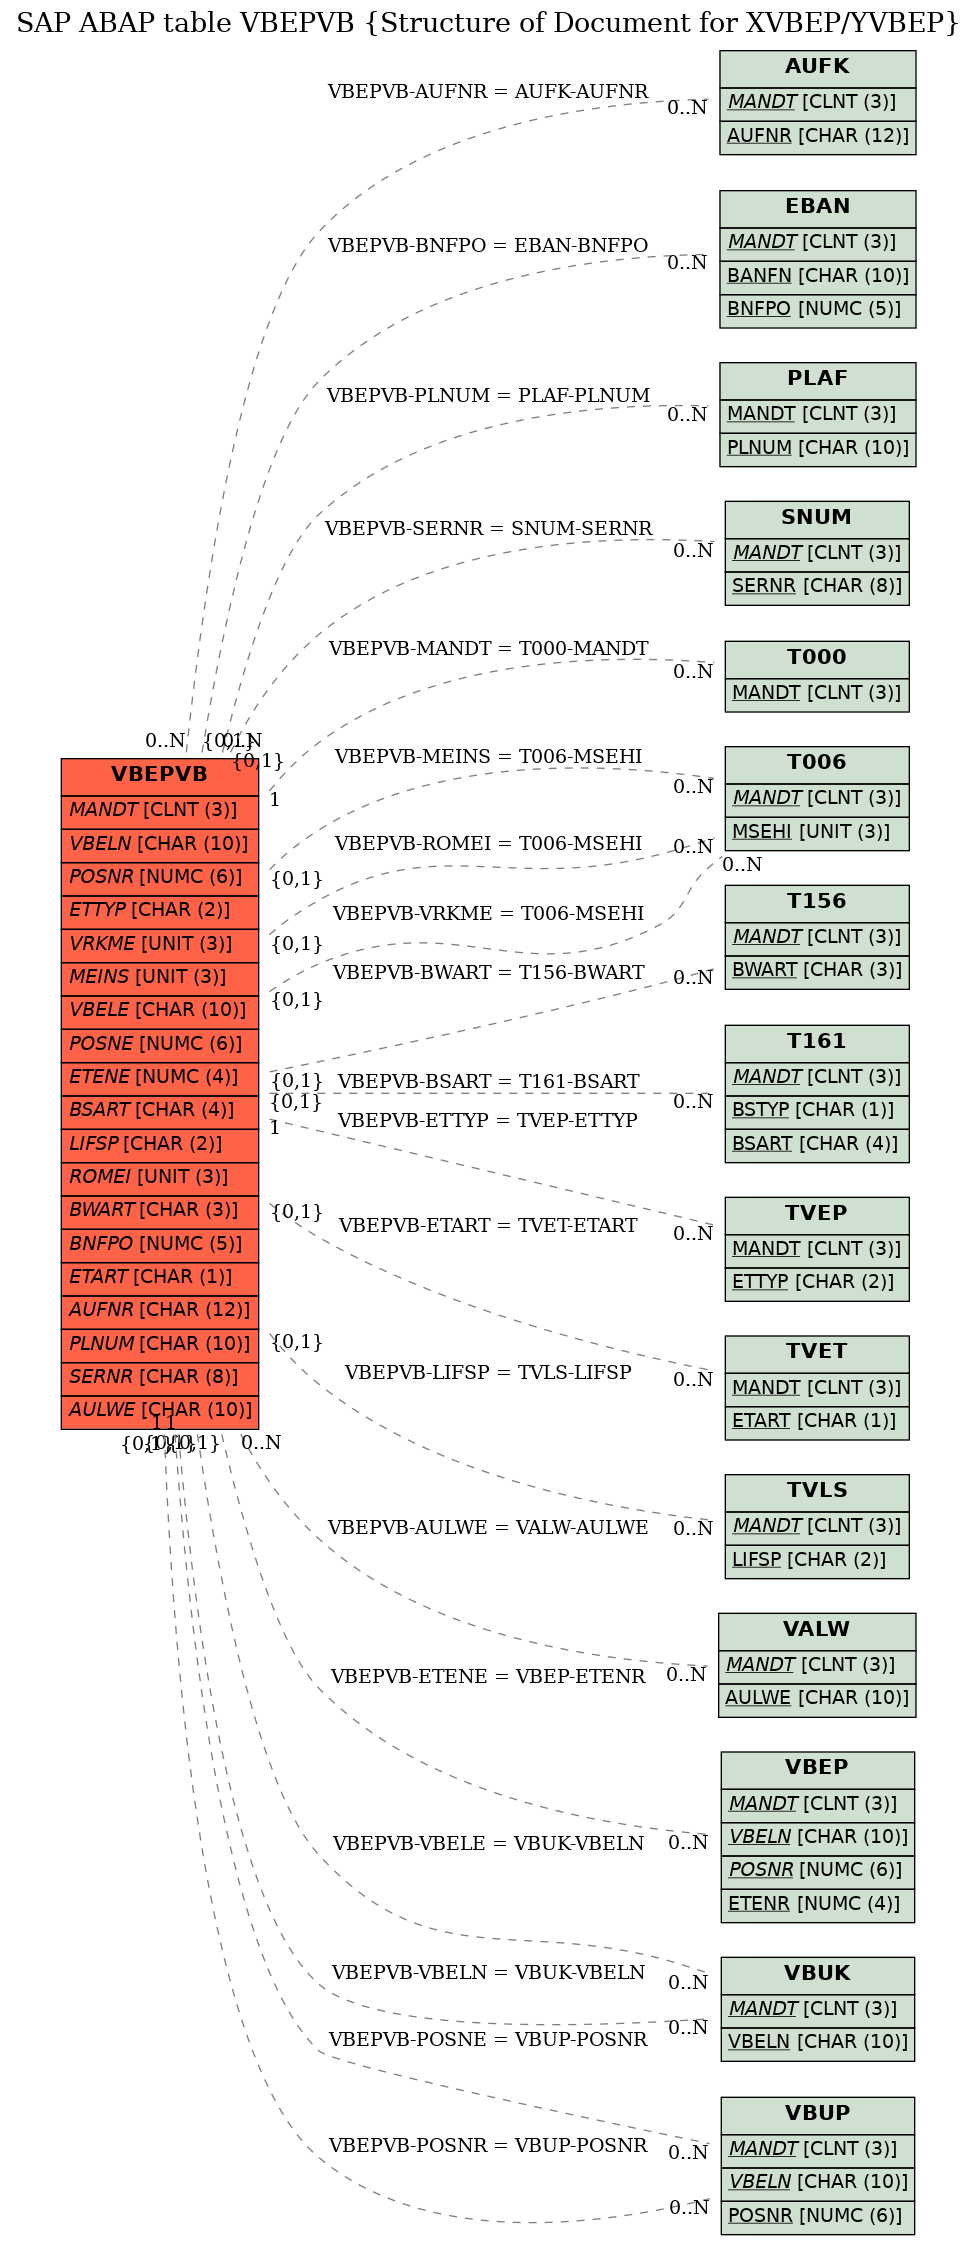 E-R Diagram for table VBEPVB (Structure of Document for XVBEP/YVBEP)